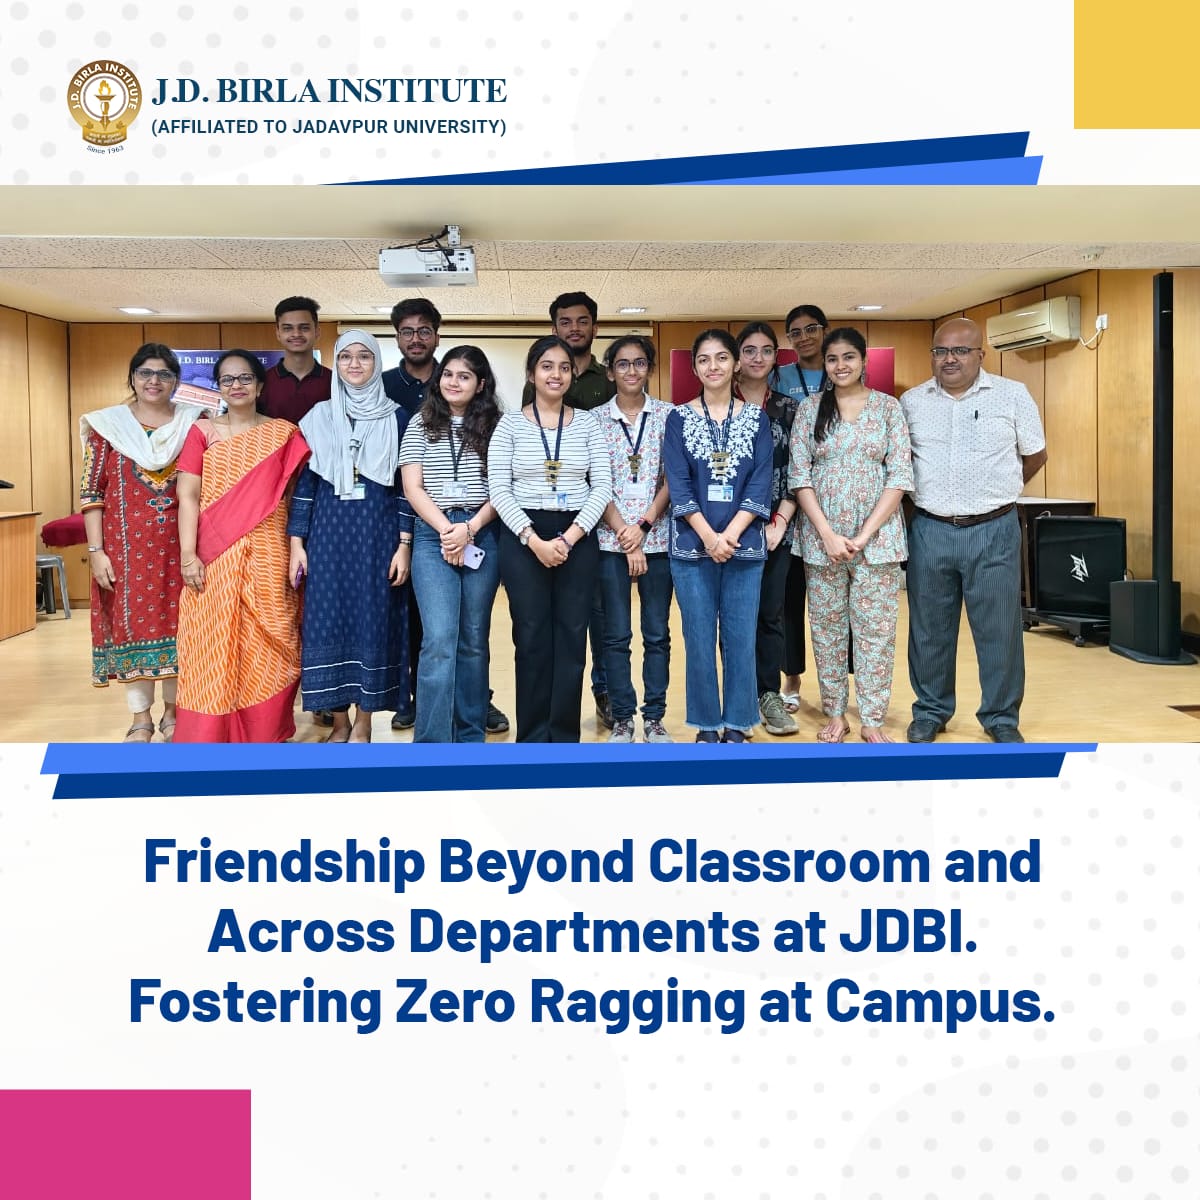 Friendship Beyond Classroom and Across Departments at JDBI. Fostering Zero Ragging at Campus.